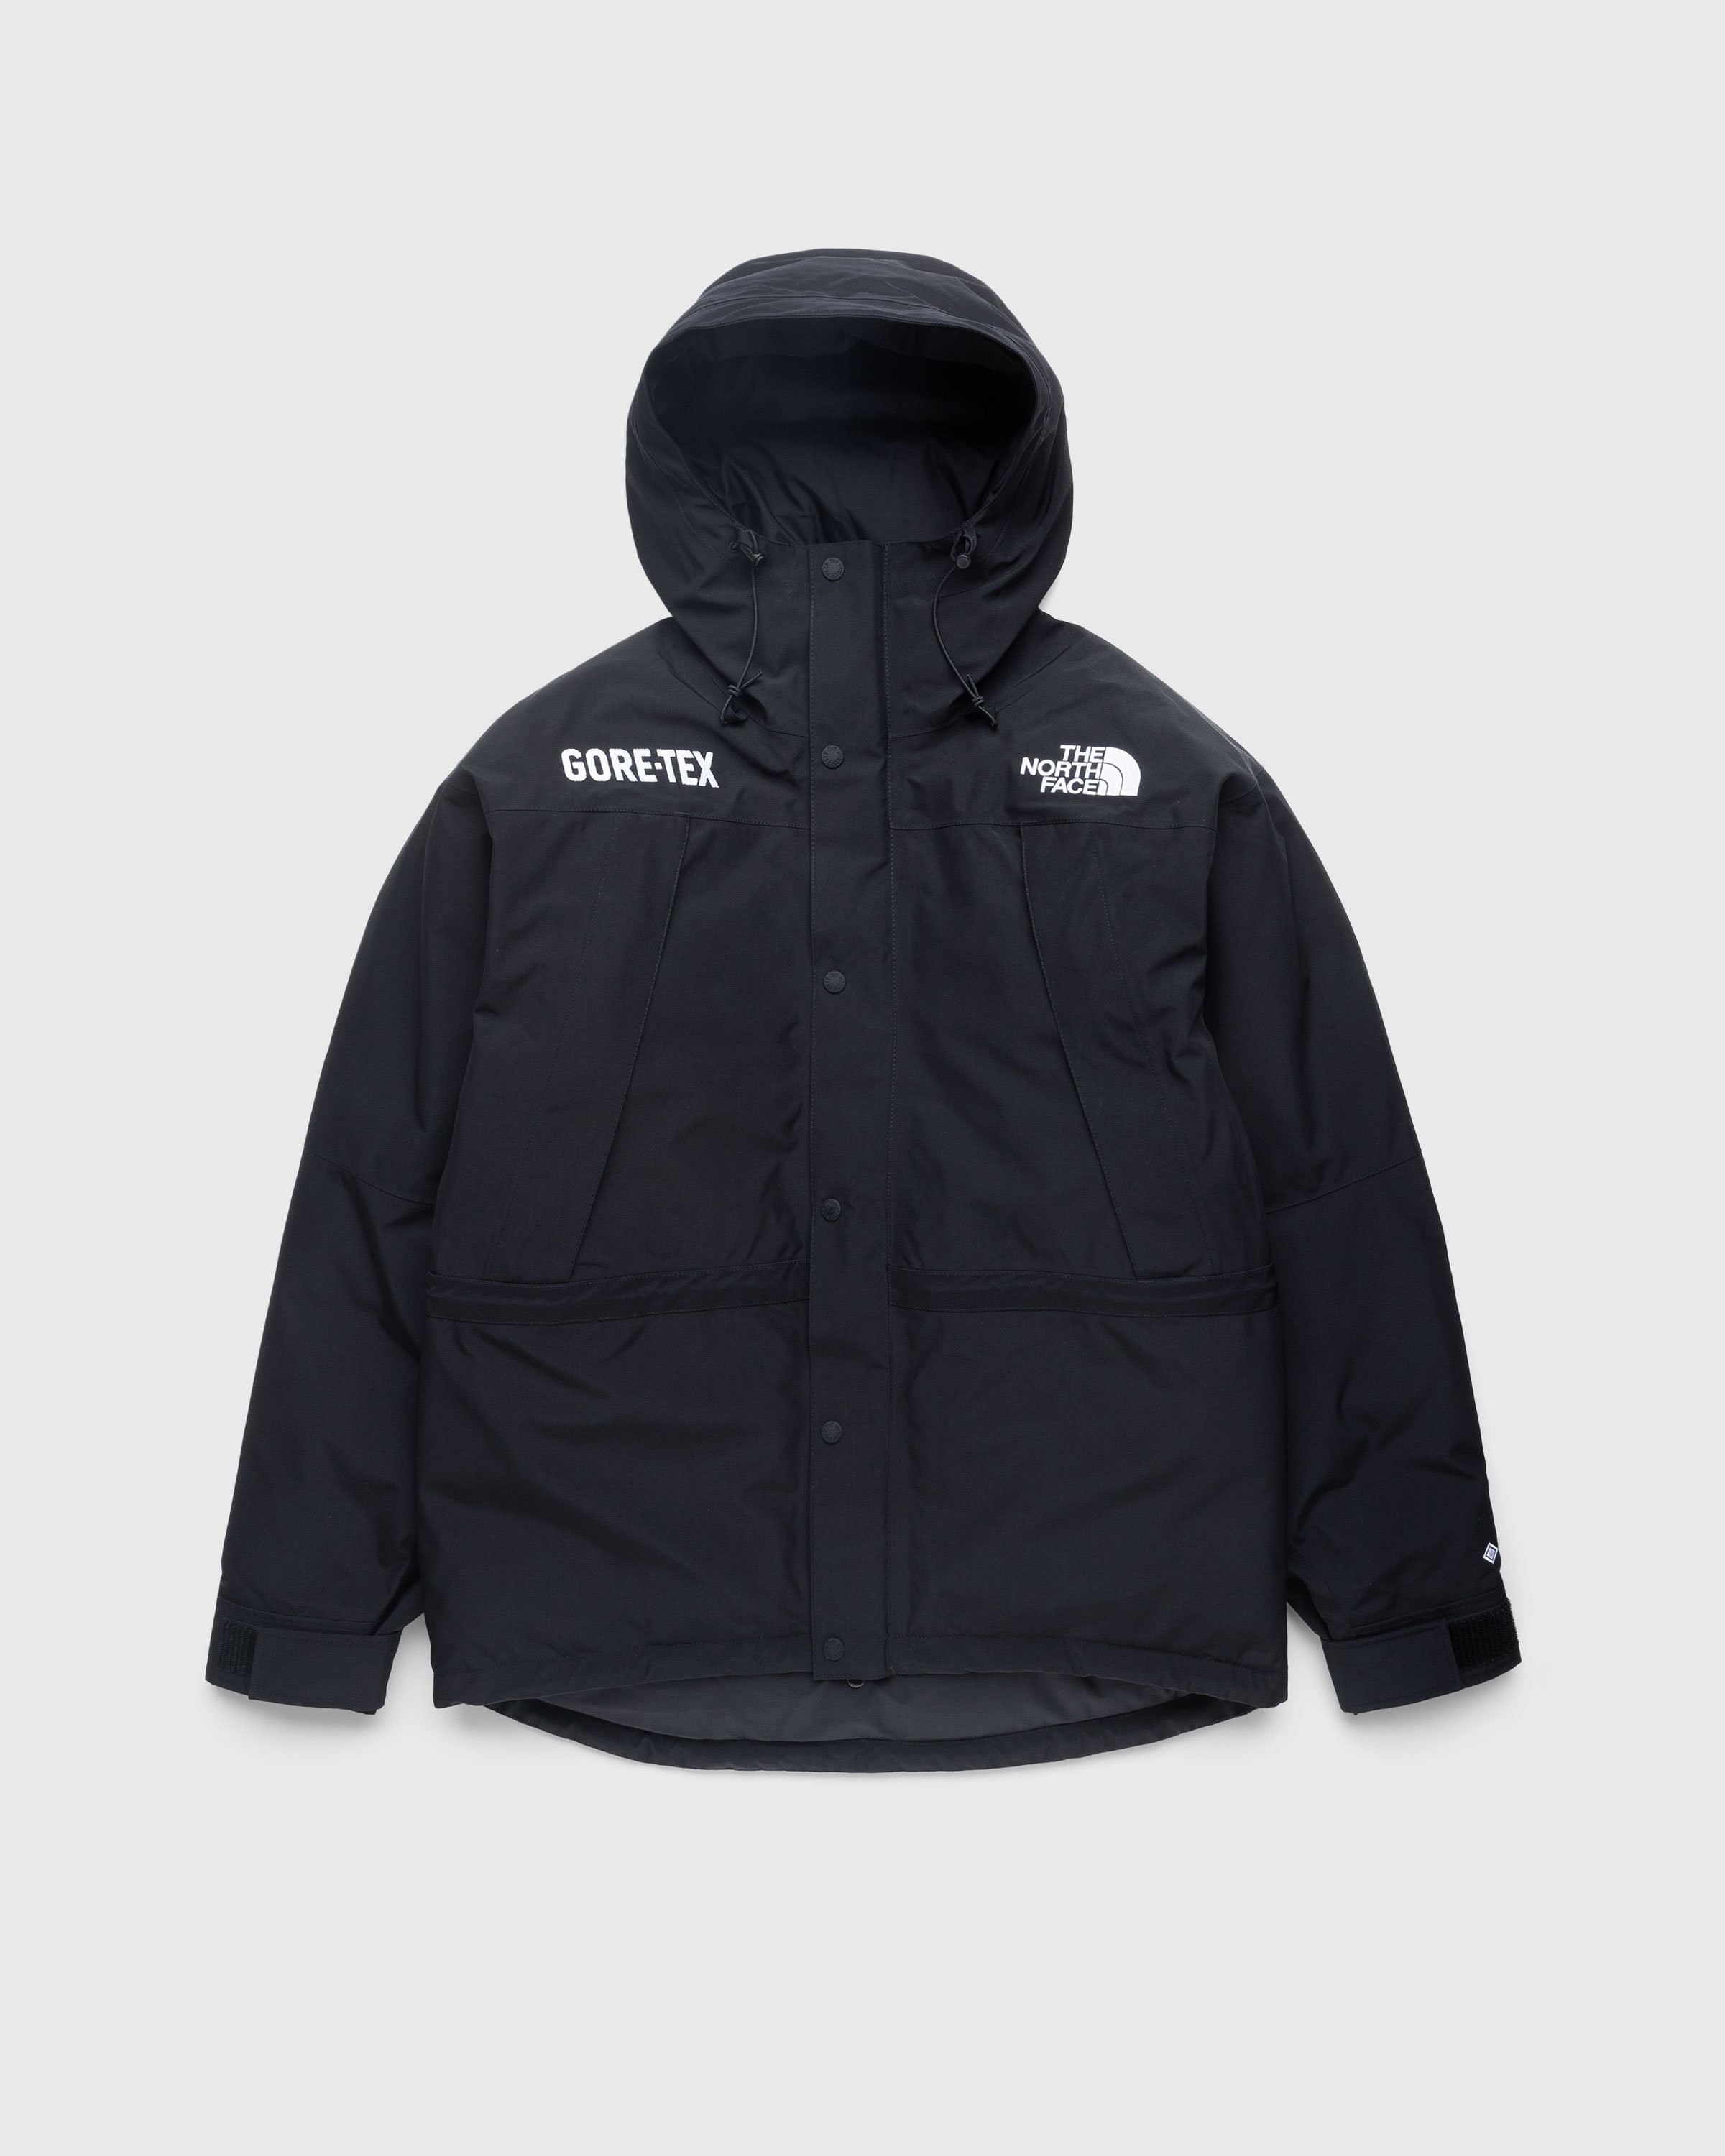 The North Face – GORE-TEX Mountain Guide Insulated Jacket Black